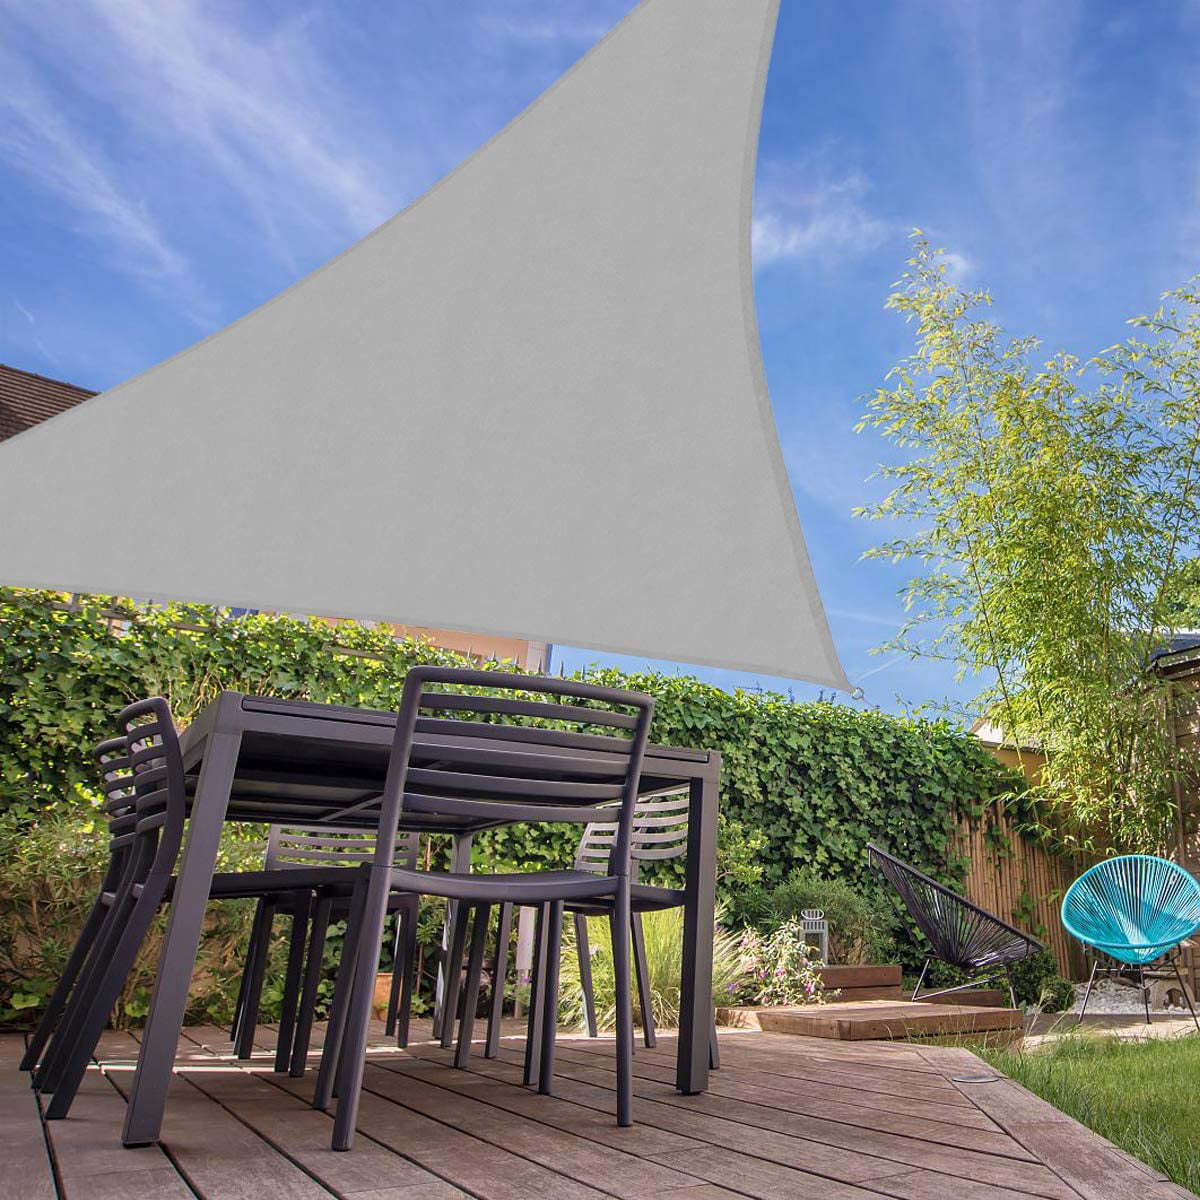 Details about   Red Sun Shade Sail Standard Size Patio Garden Pergola UV Block Fabric Top 